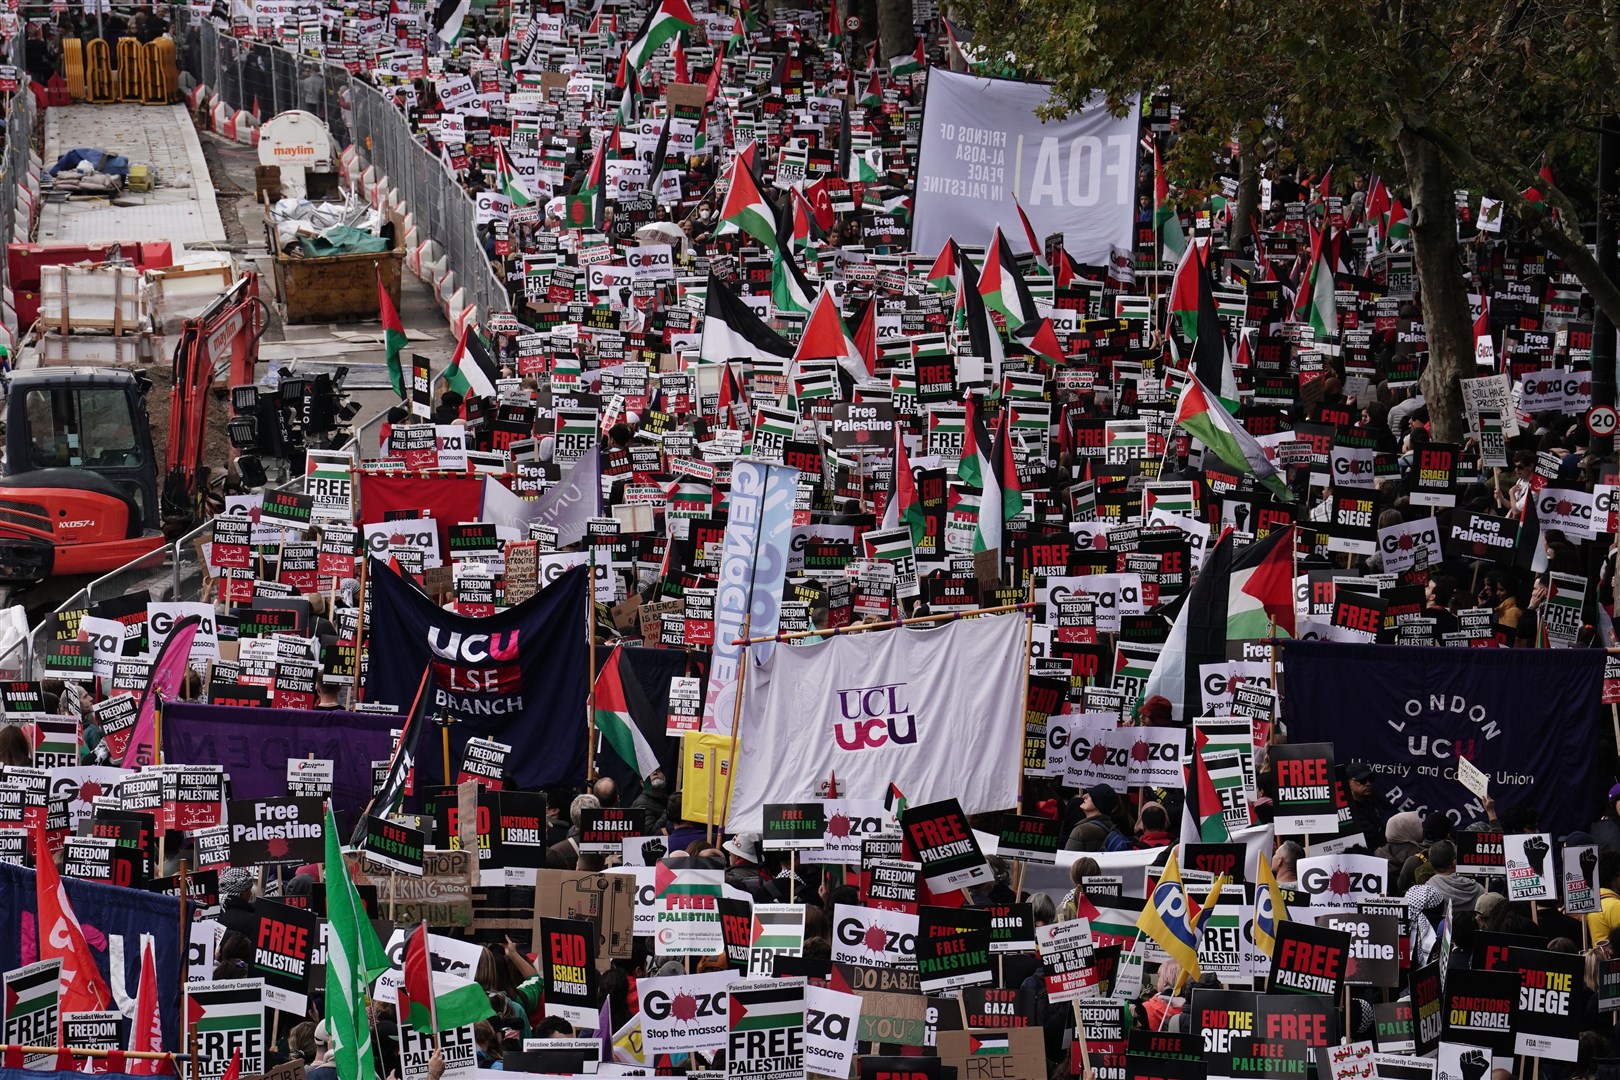 Protesters during a pro-Palestine march organised by Palestine Solidarity Campaign in central London on Saturday (Jordan Pettitt/PA)